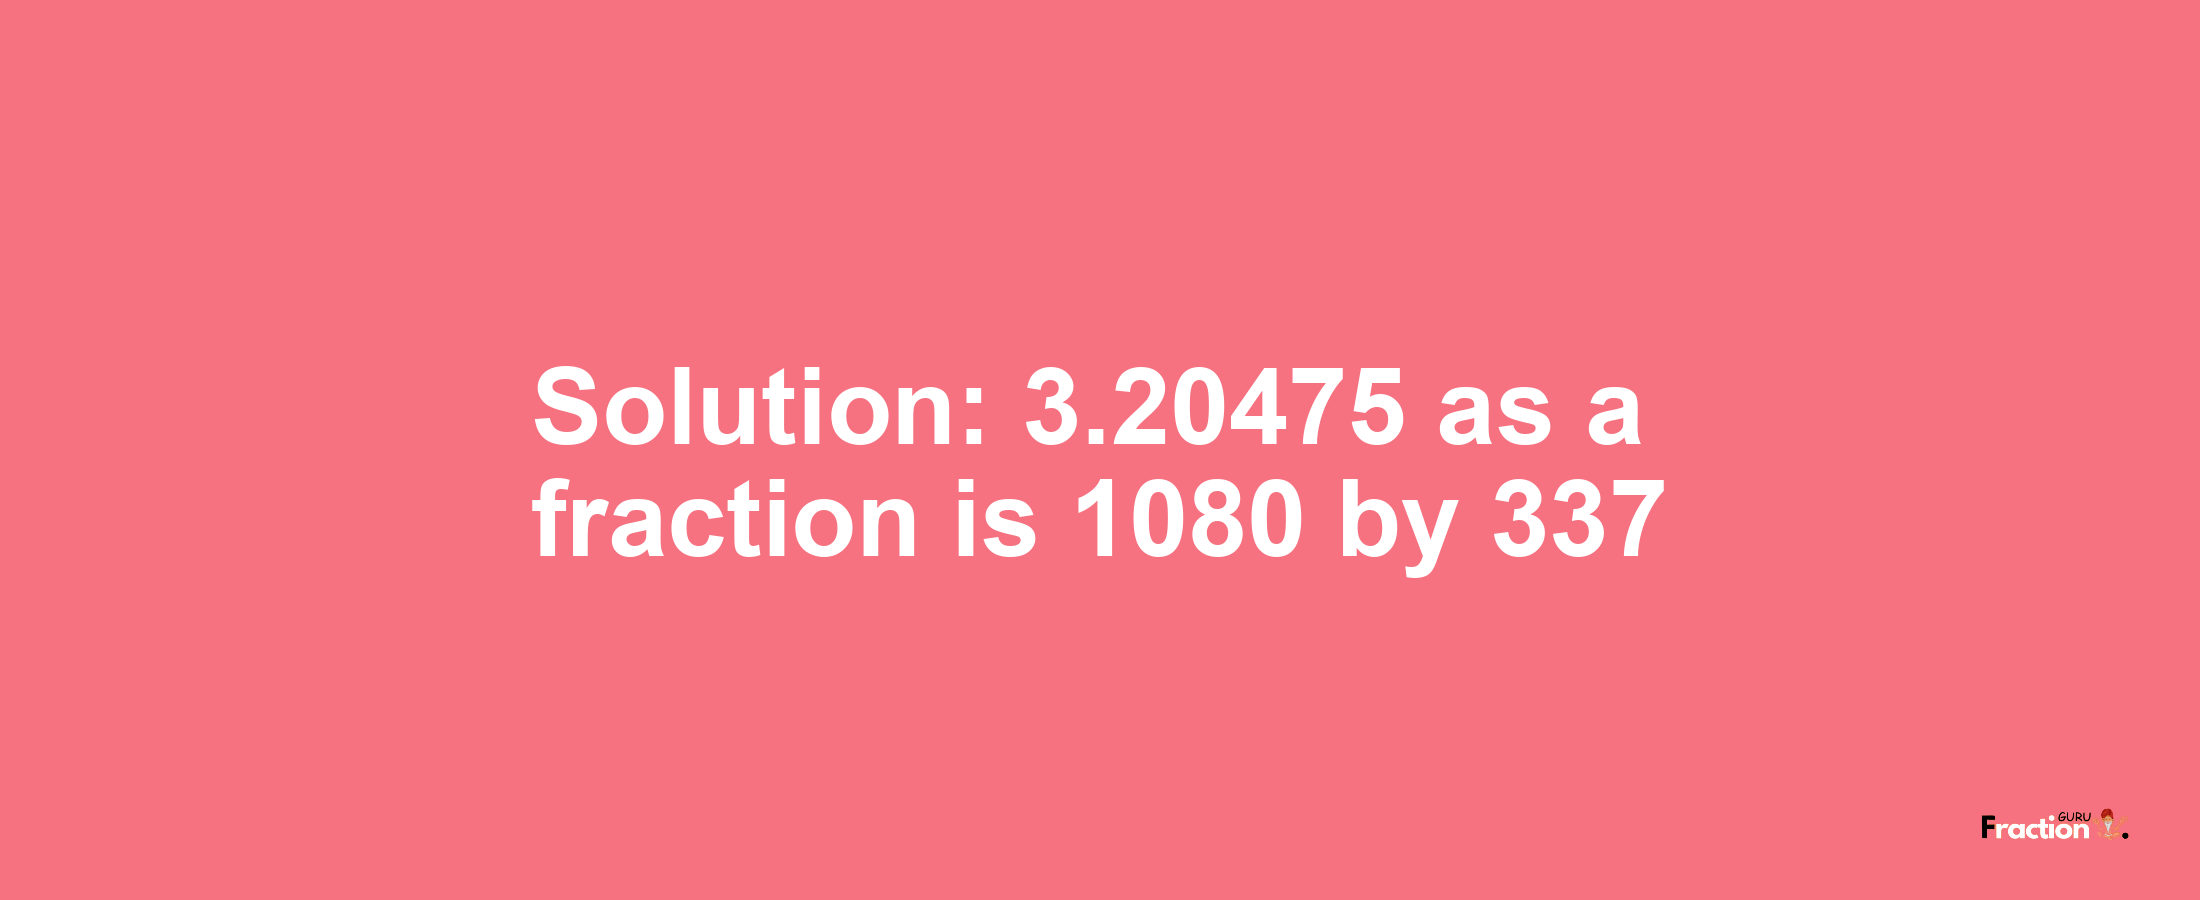 Solution:3.20475 as a fraction is 1080/337